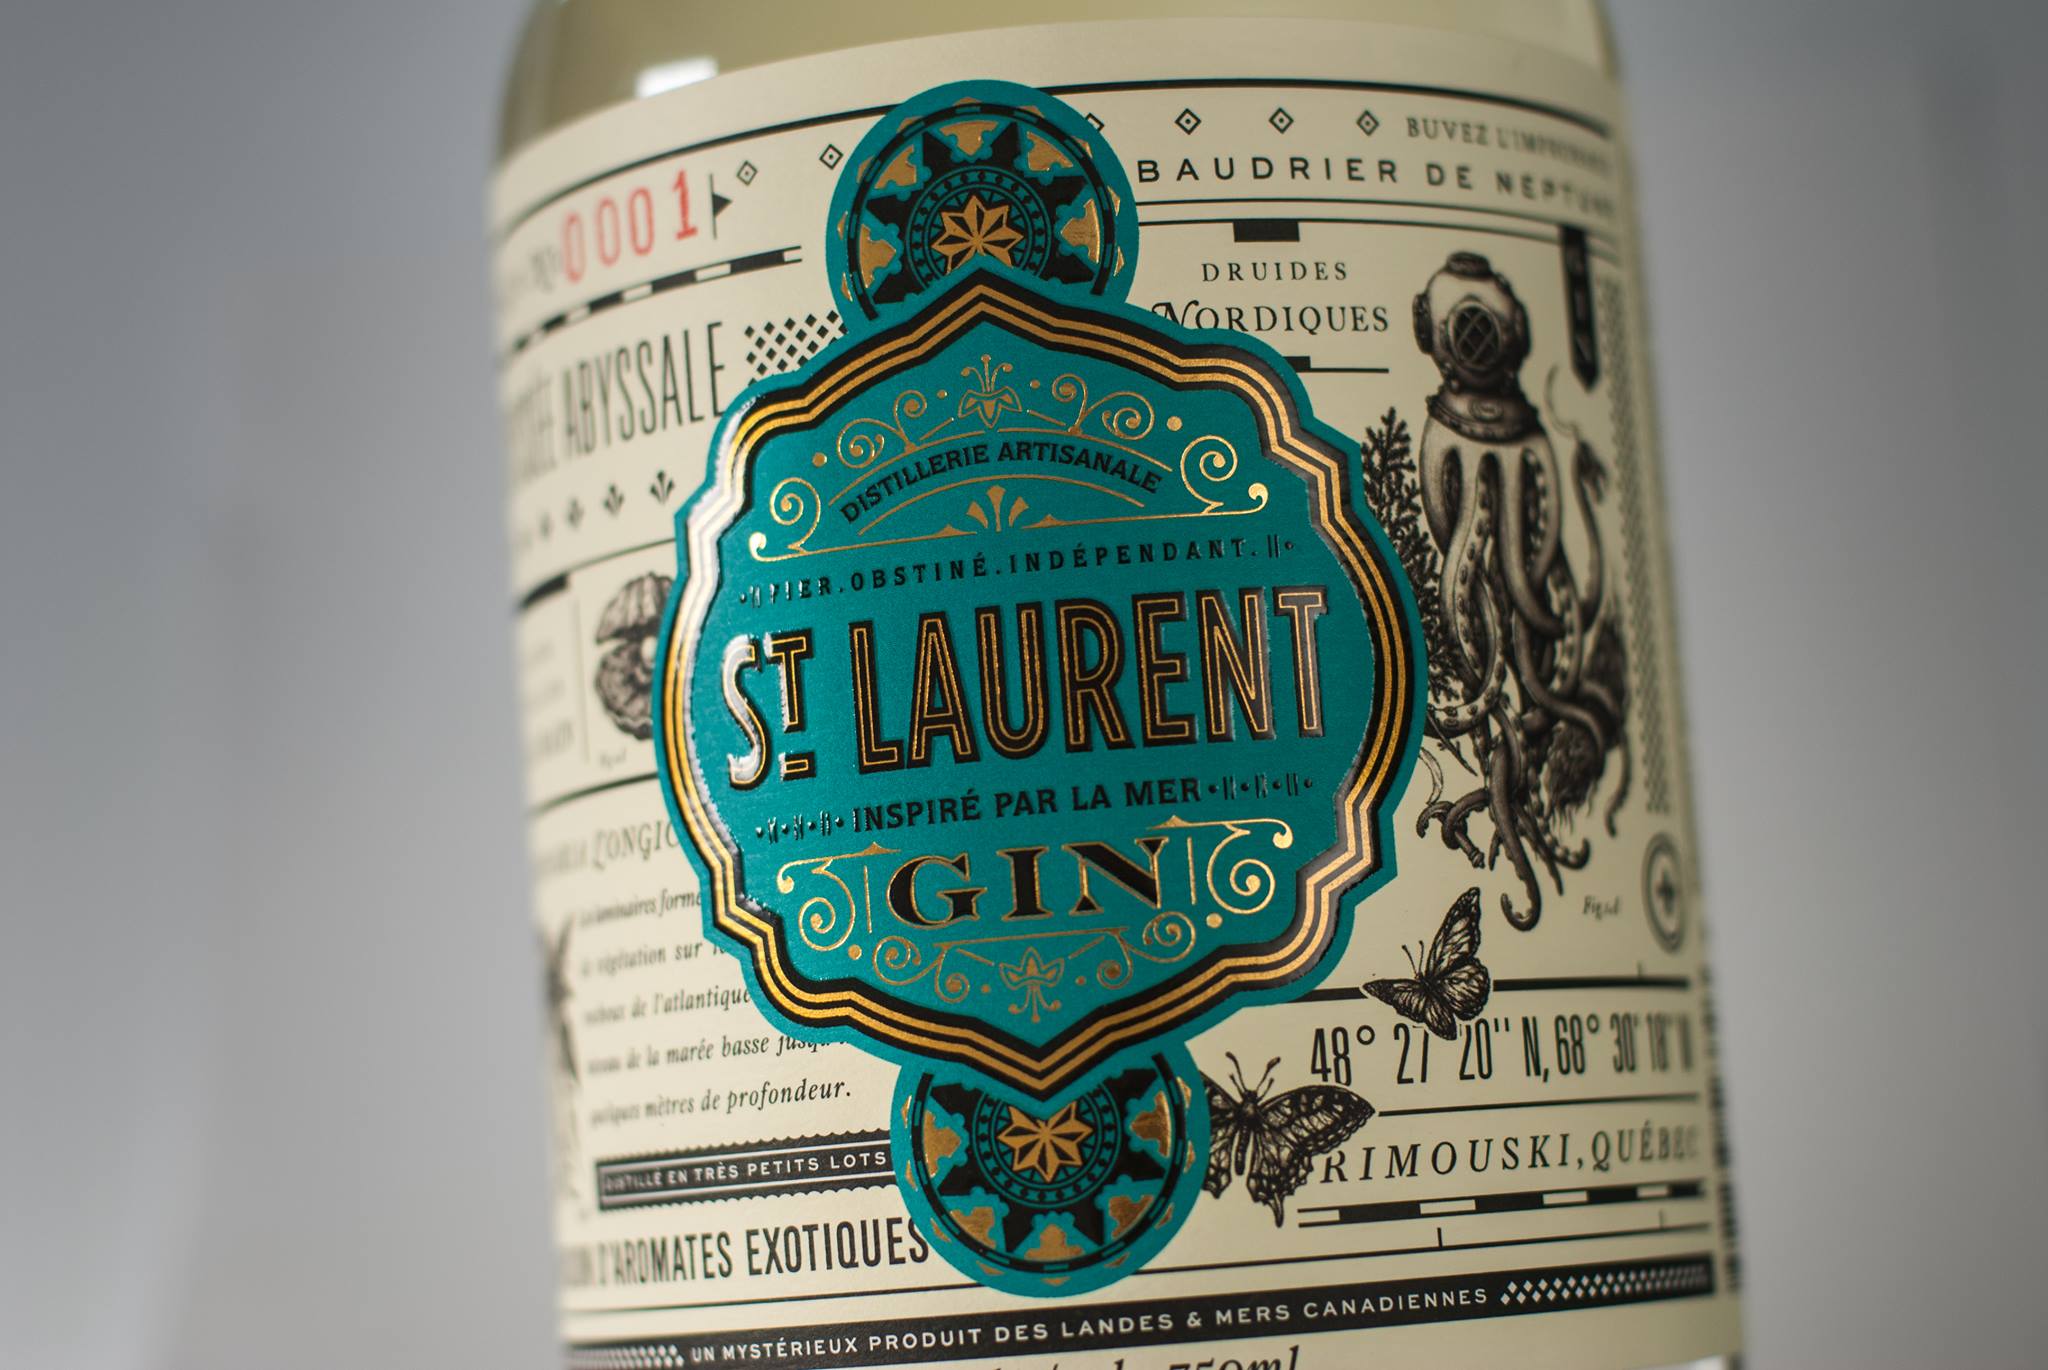 Bottle of gin from St-Laurent's Gin